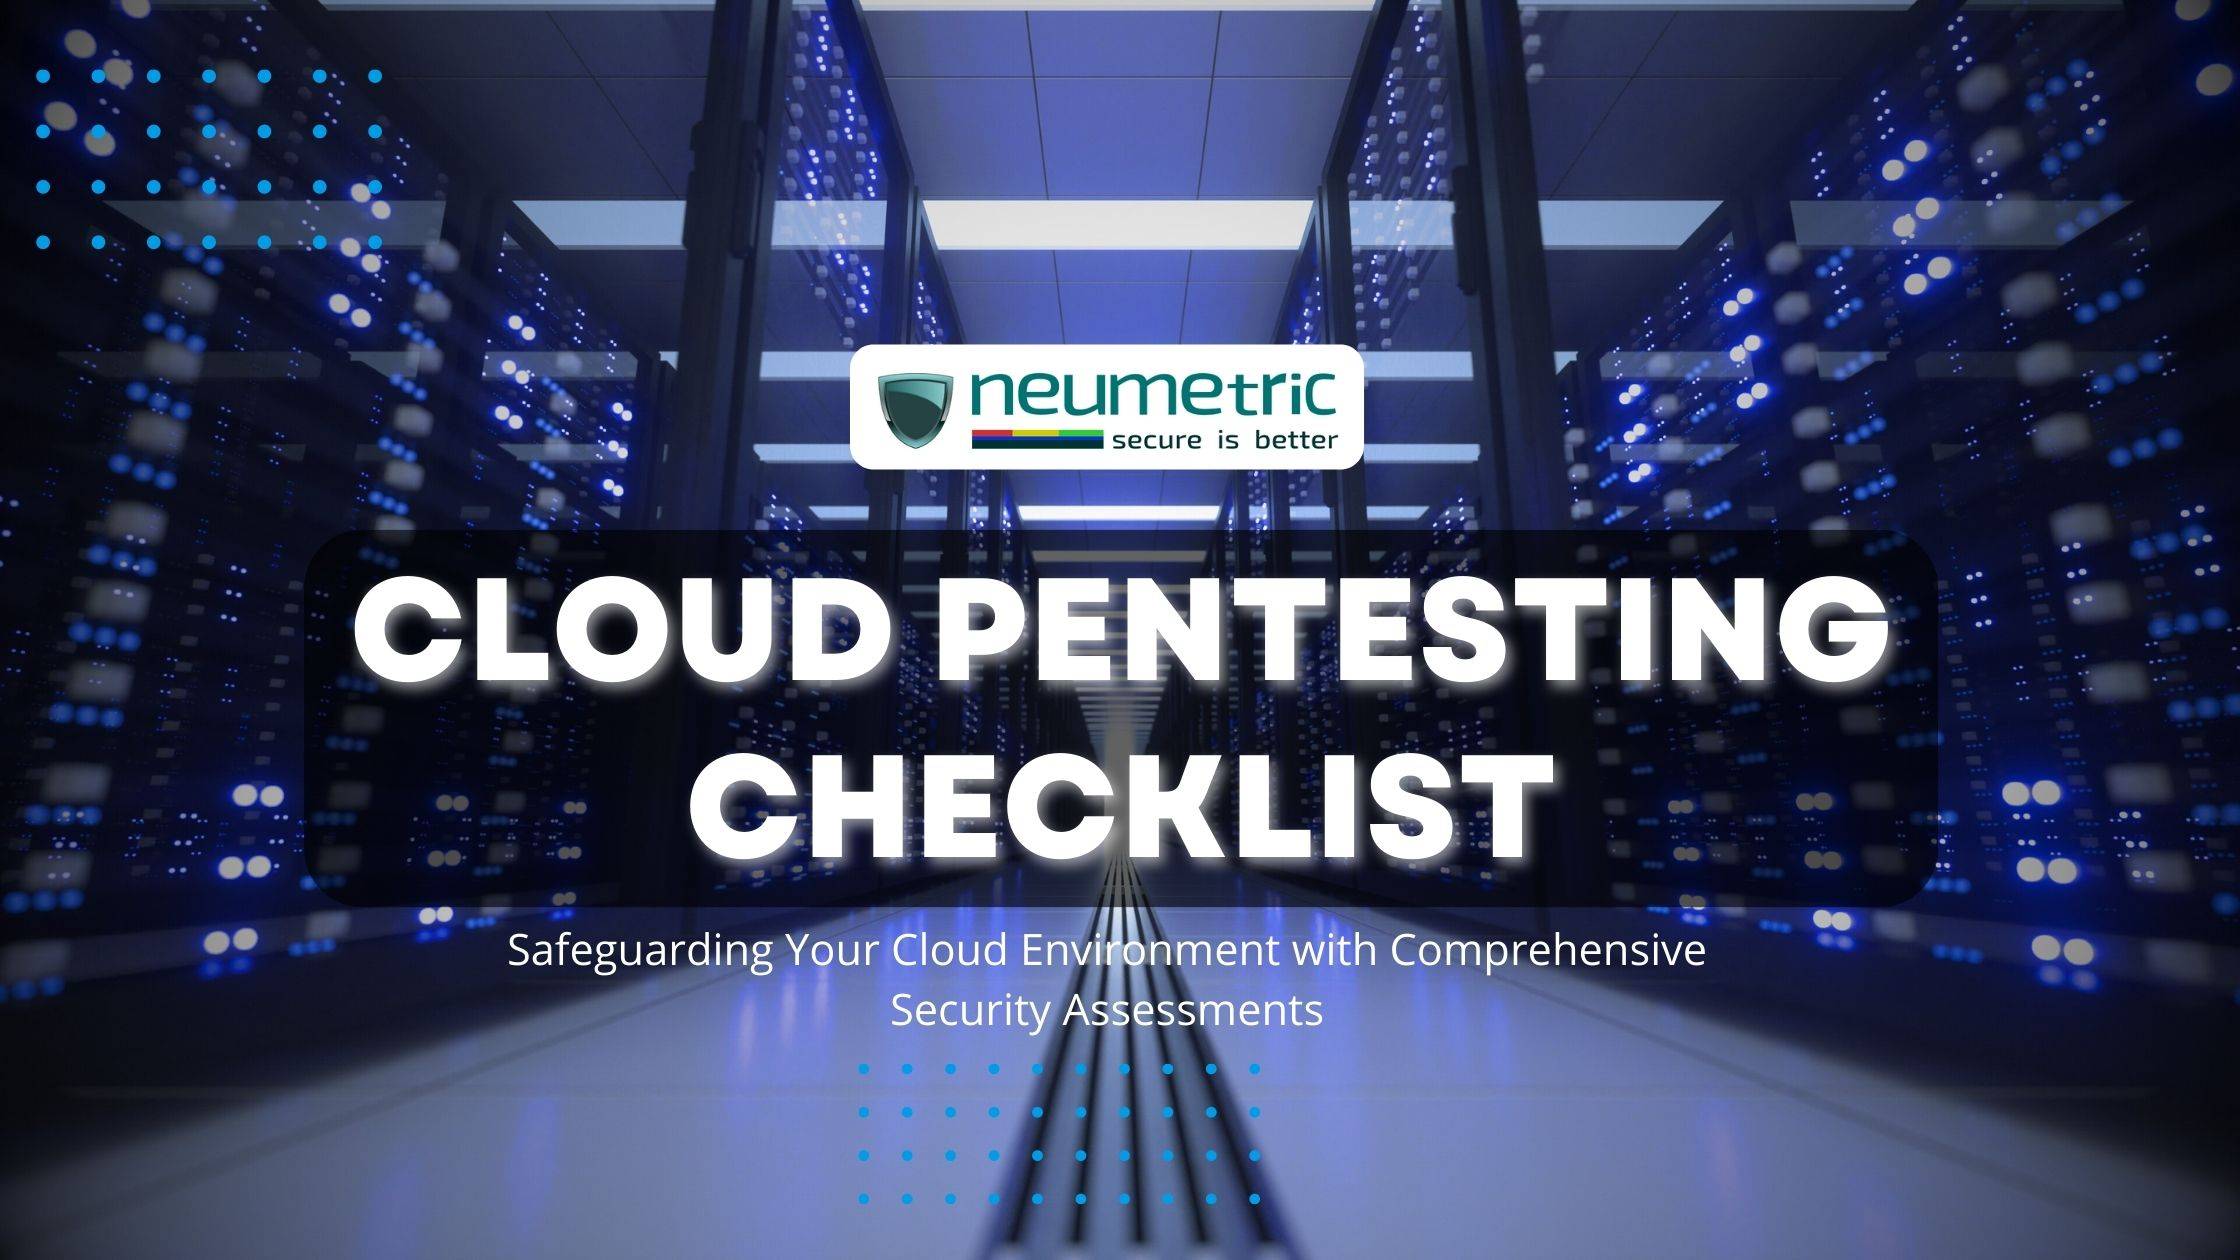 Cloud Pentesting Checklist: Safeguarding Your Cloud Environment with Comprehensive Security Assessments